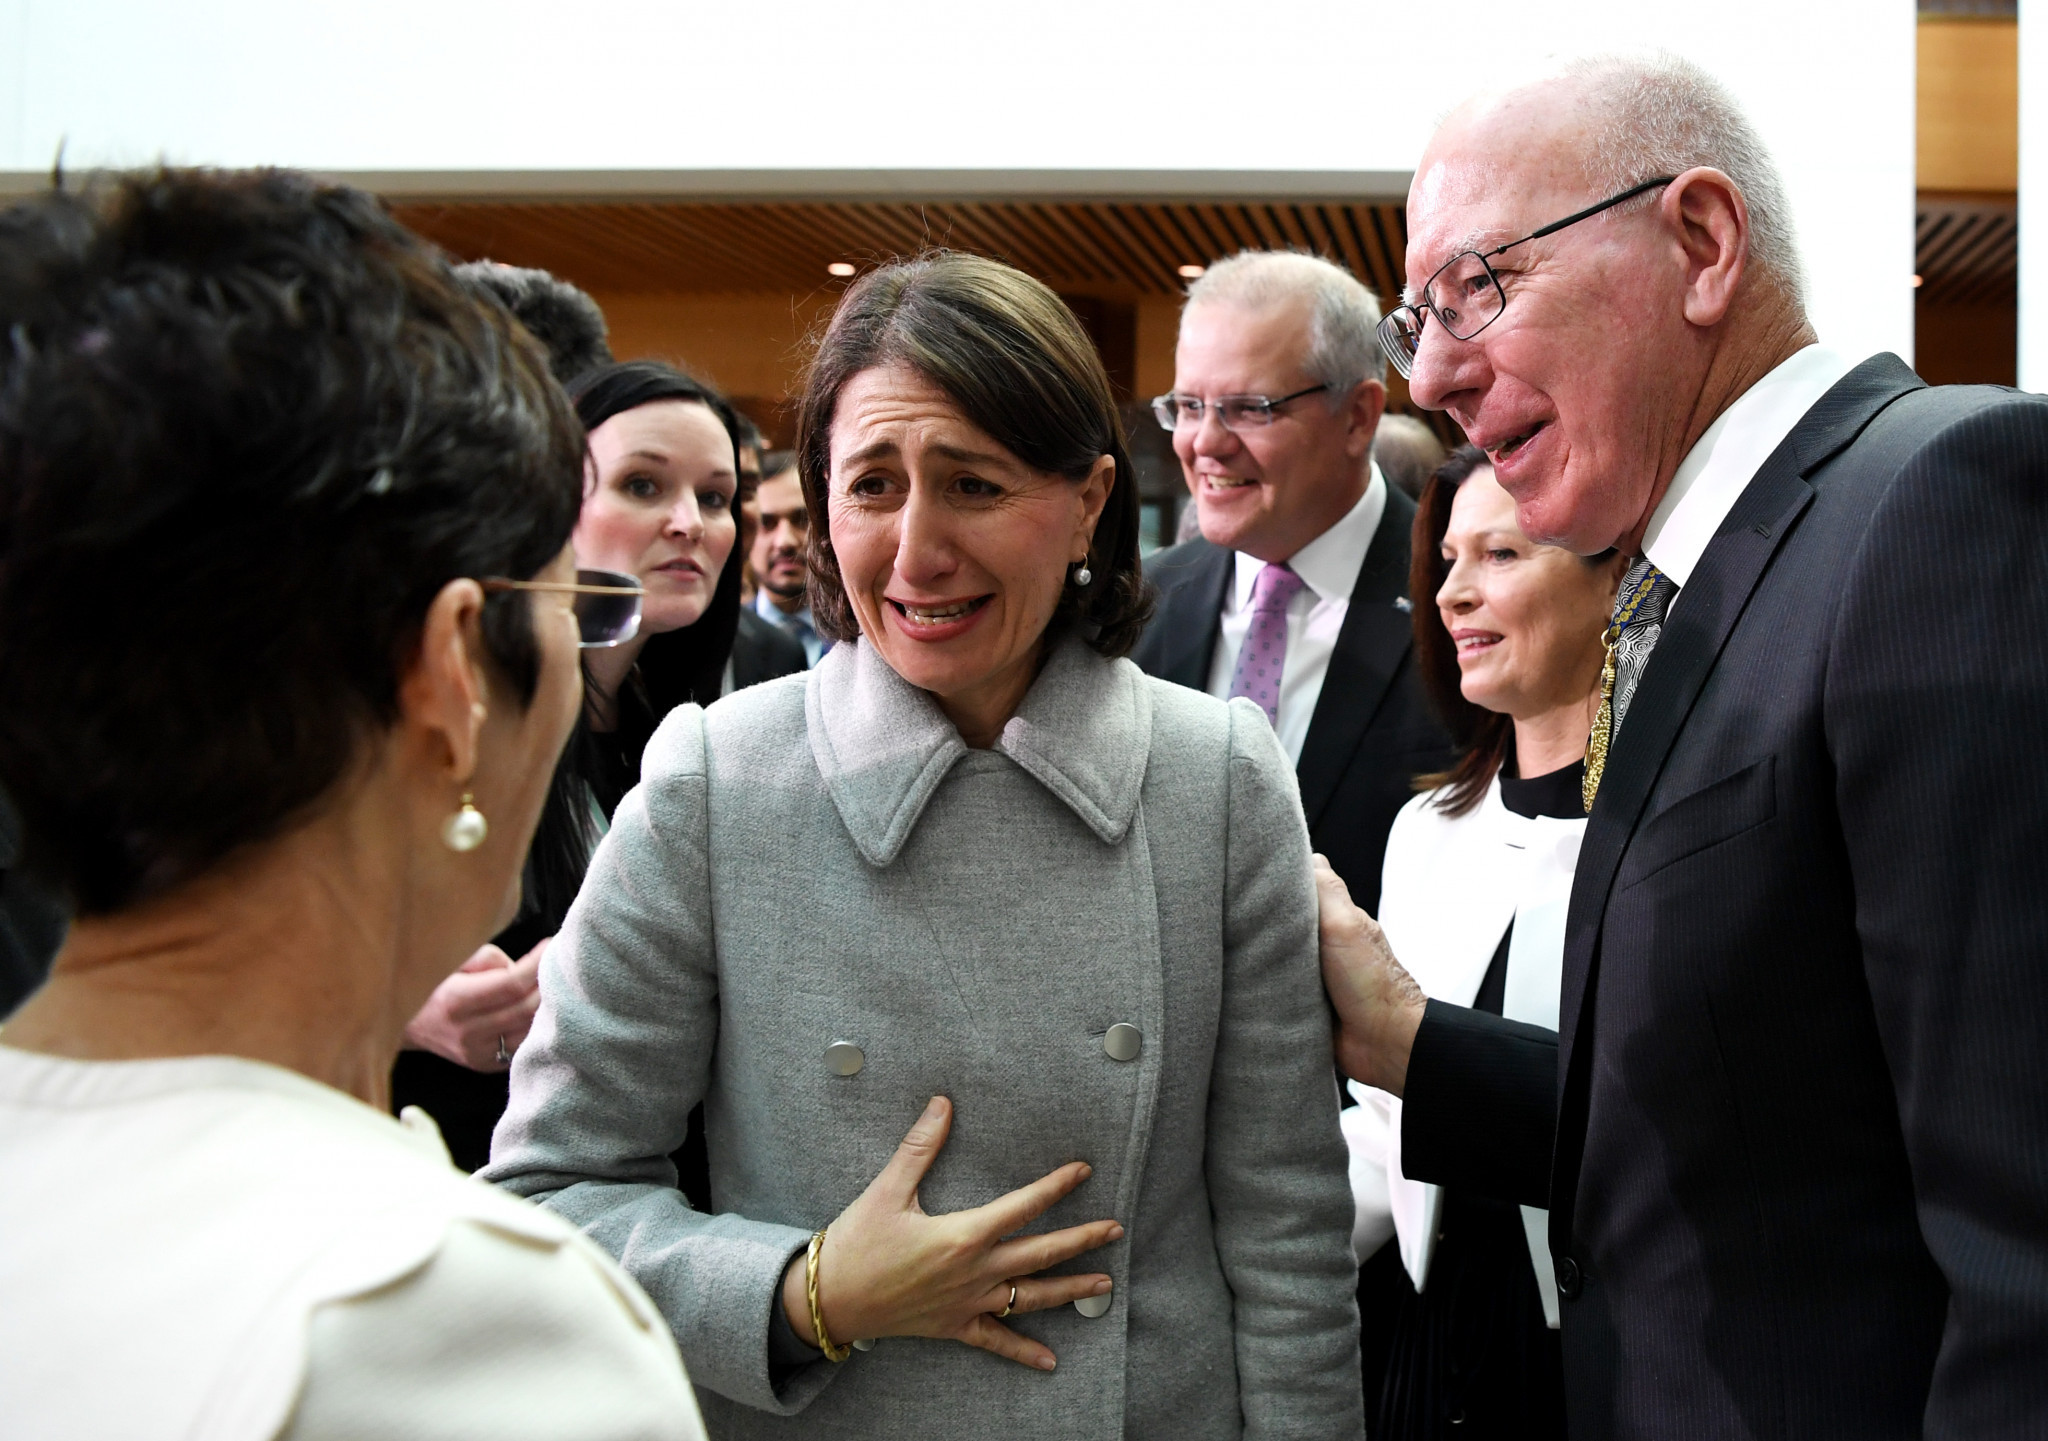 New South Wales Premier Gladys Berejiklian, centre, has backed Australia's bid for the 2023 FIFA Women's World Cup ©Getty Images